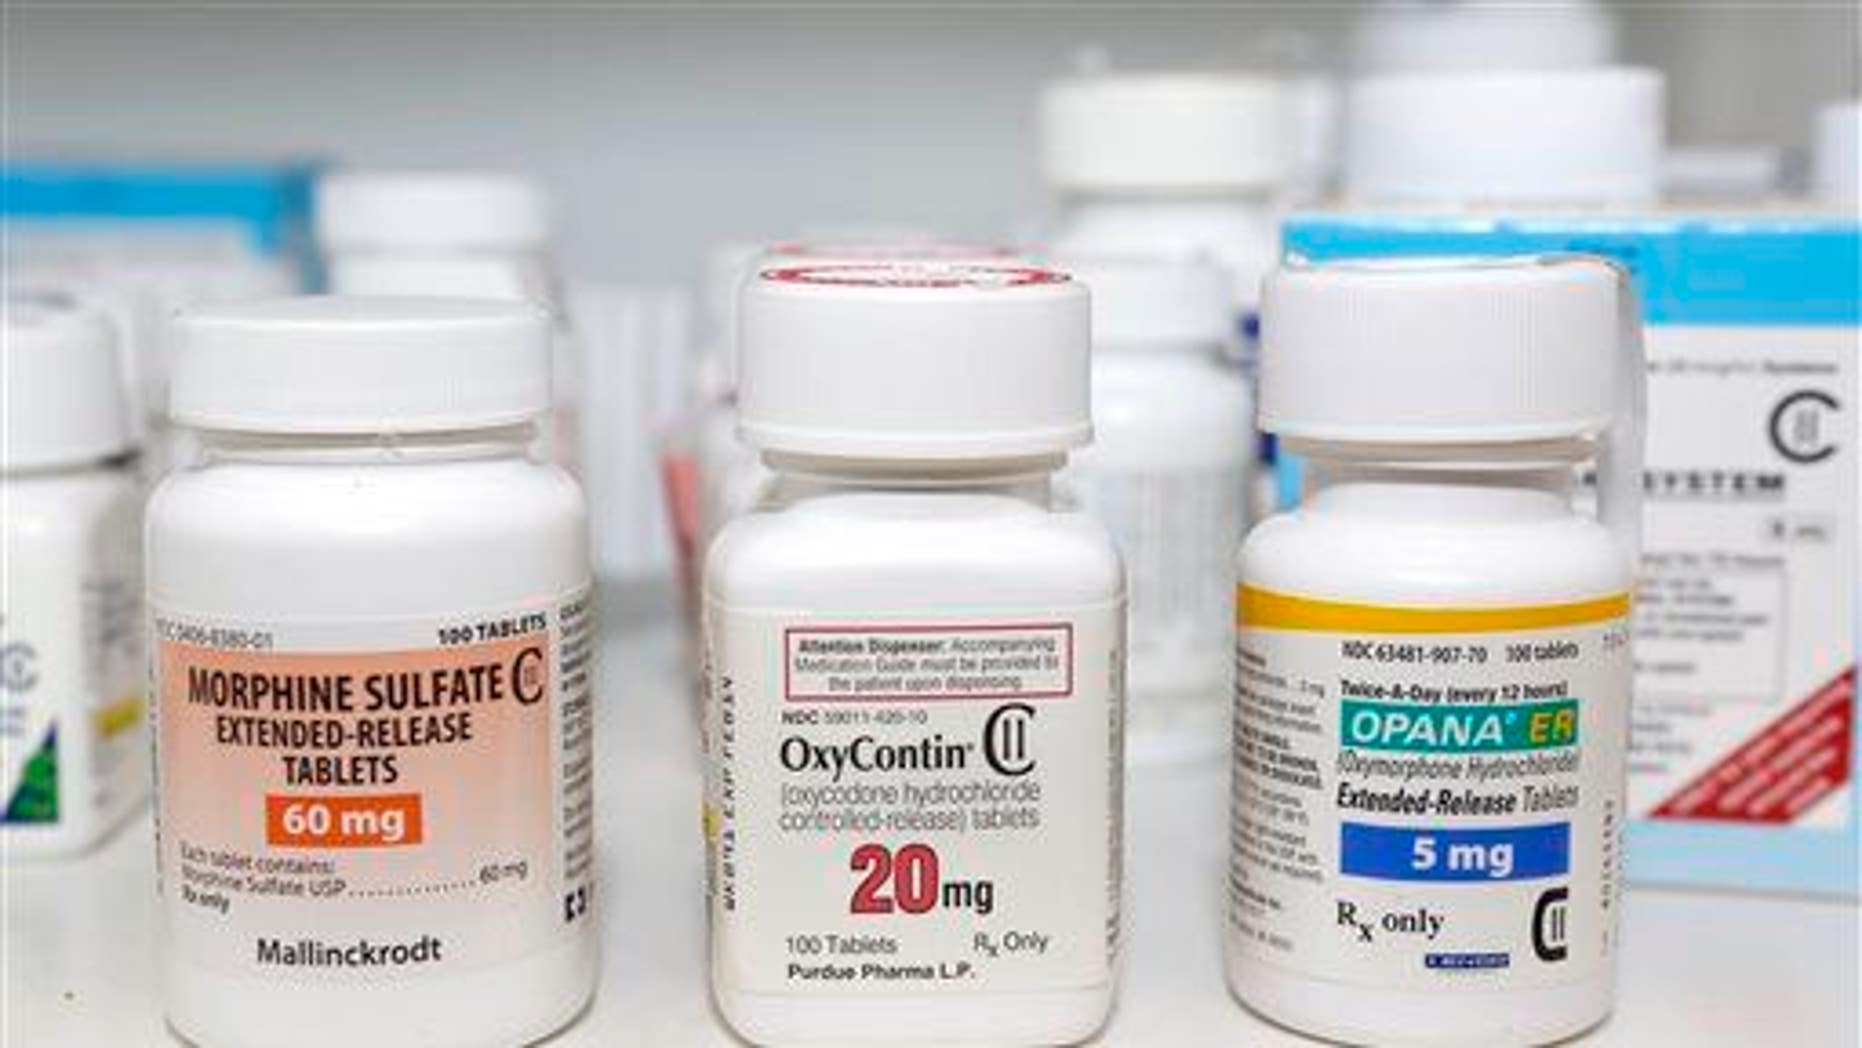 Single Pill Mixes Morphine And Oxycodone Fox News